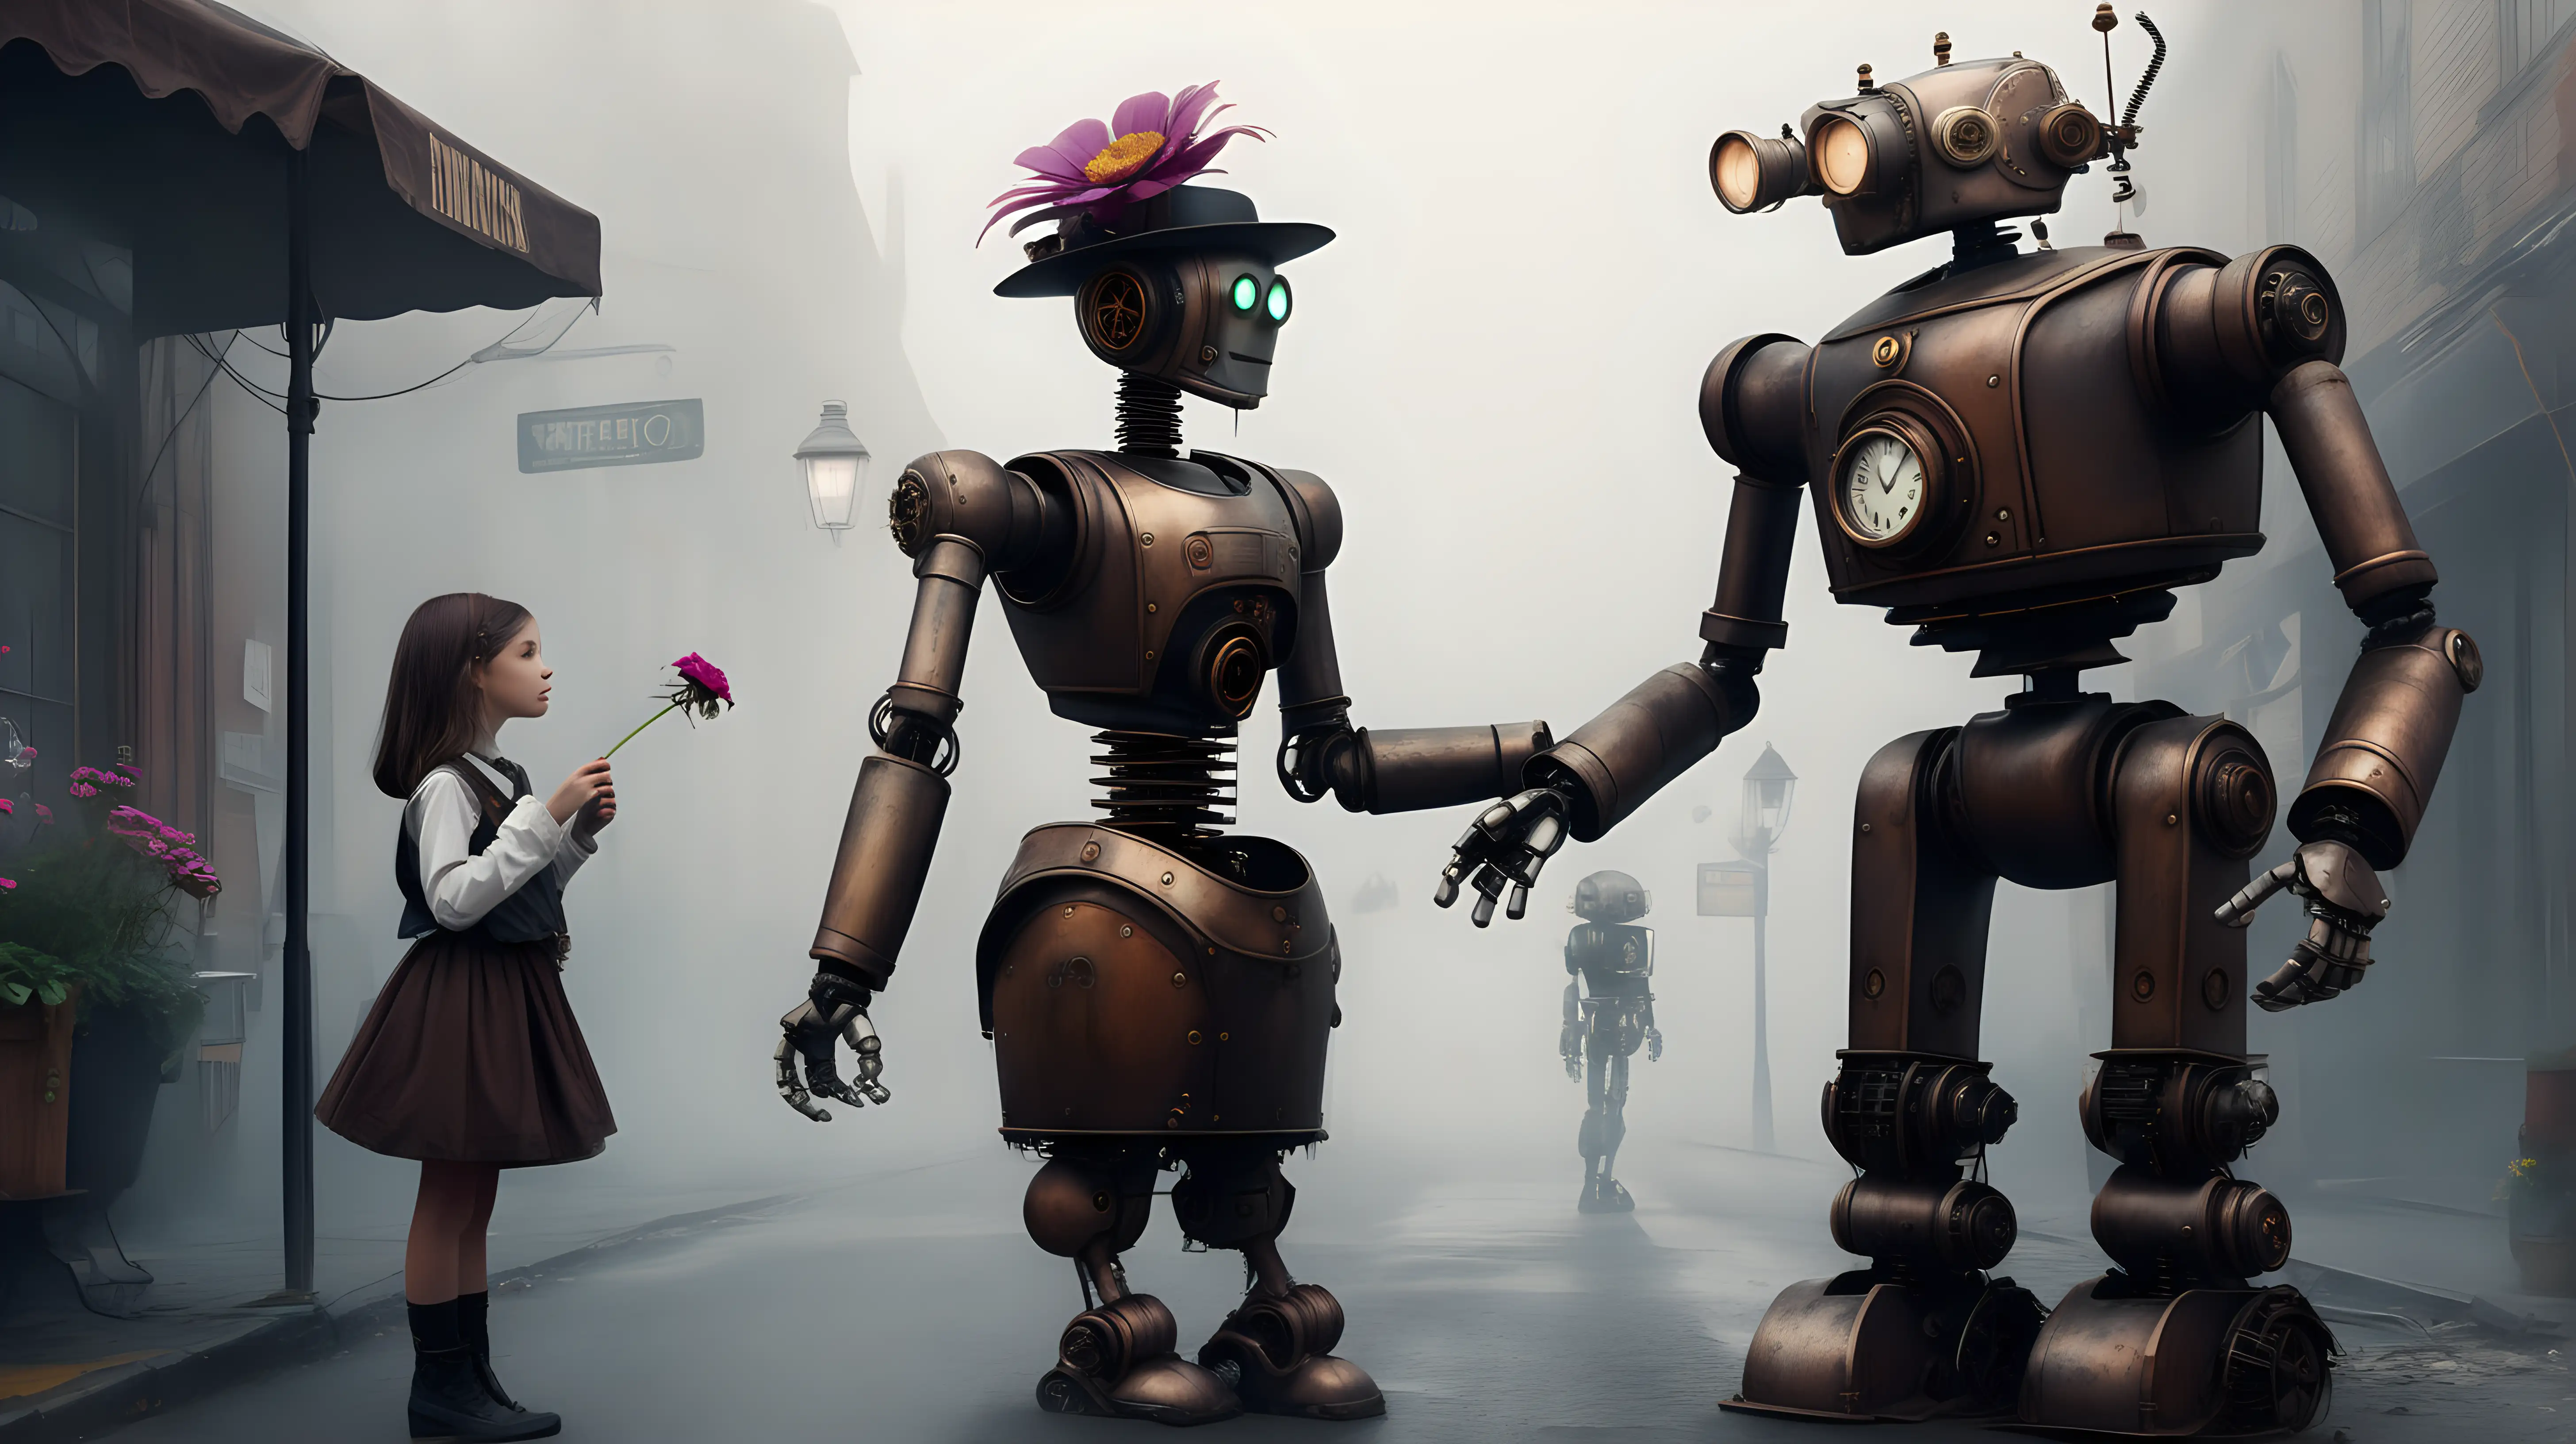 Enchanting Encounter Steampunk Robot Engages in Conversation with Girl Amidst Street Fog